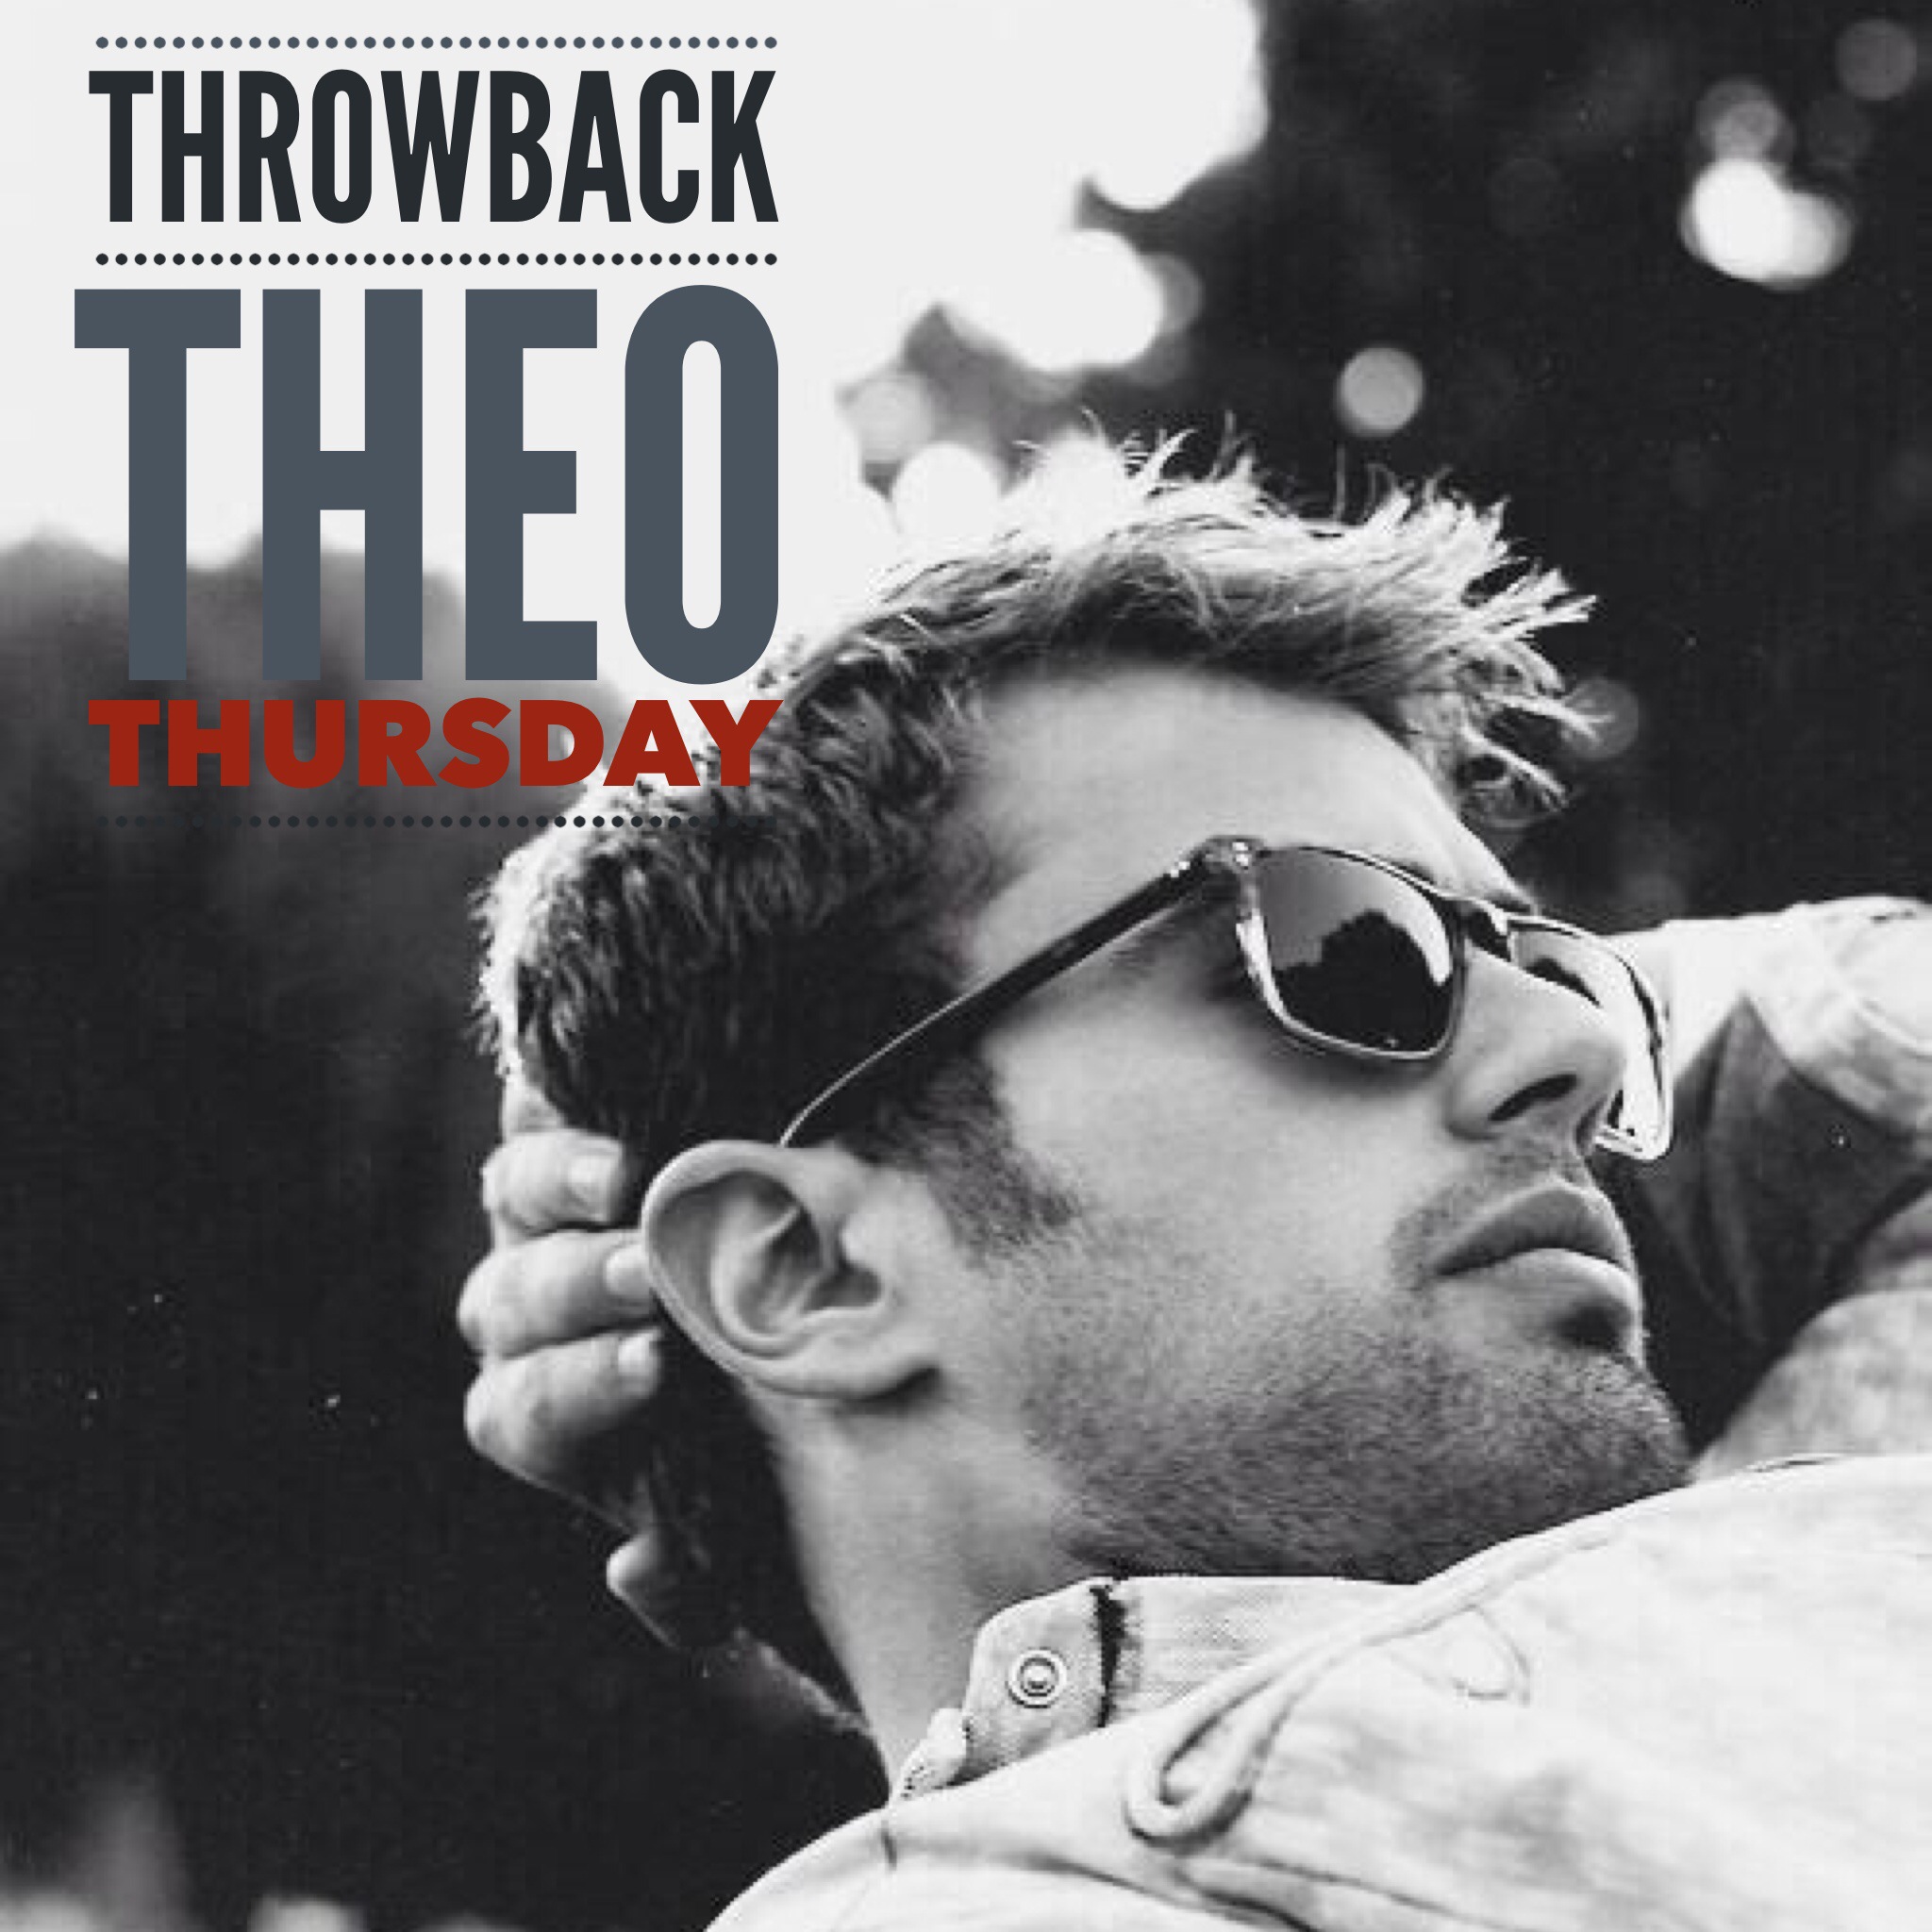 Throwback Theo Thursday – ShereKhan Edition “Can’t Complain”